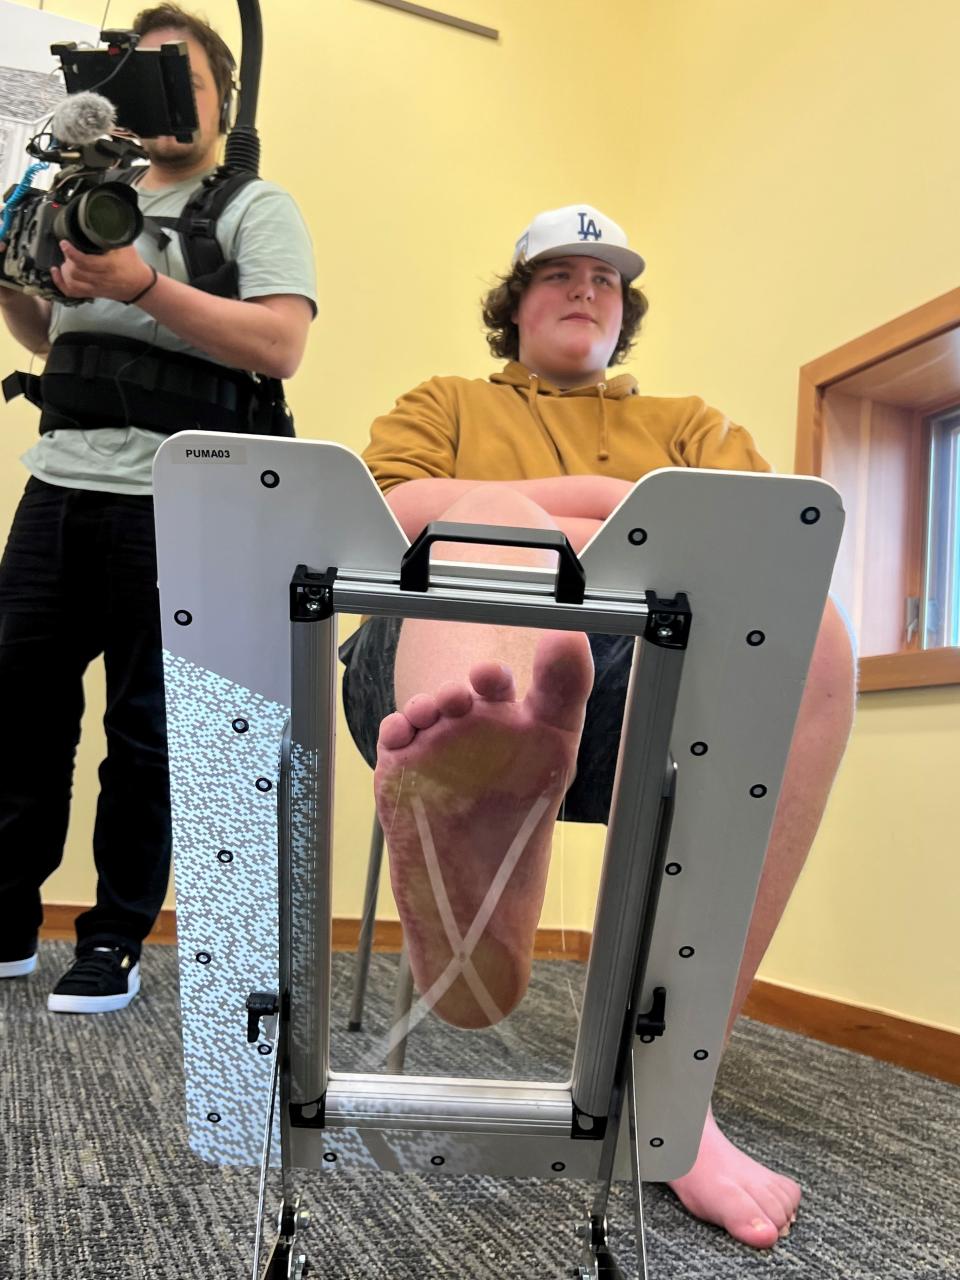 Representatives from PUMA flew to Michigan in April to measure Eric Kilburn Jr.'s feet at the Brandon Township Library. The company is making him custom basketball shoes that are "Eric-sized."